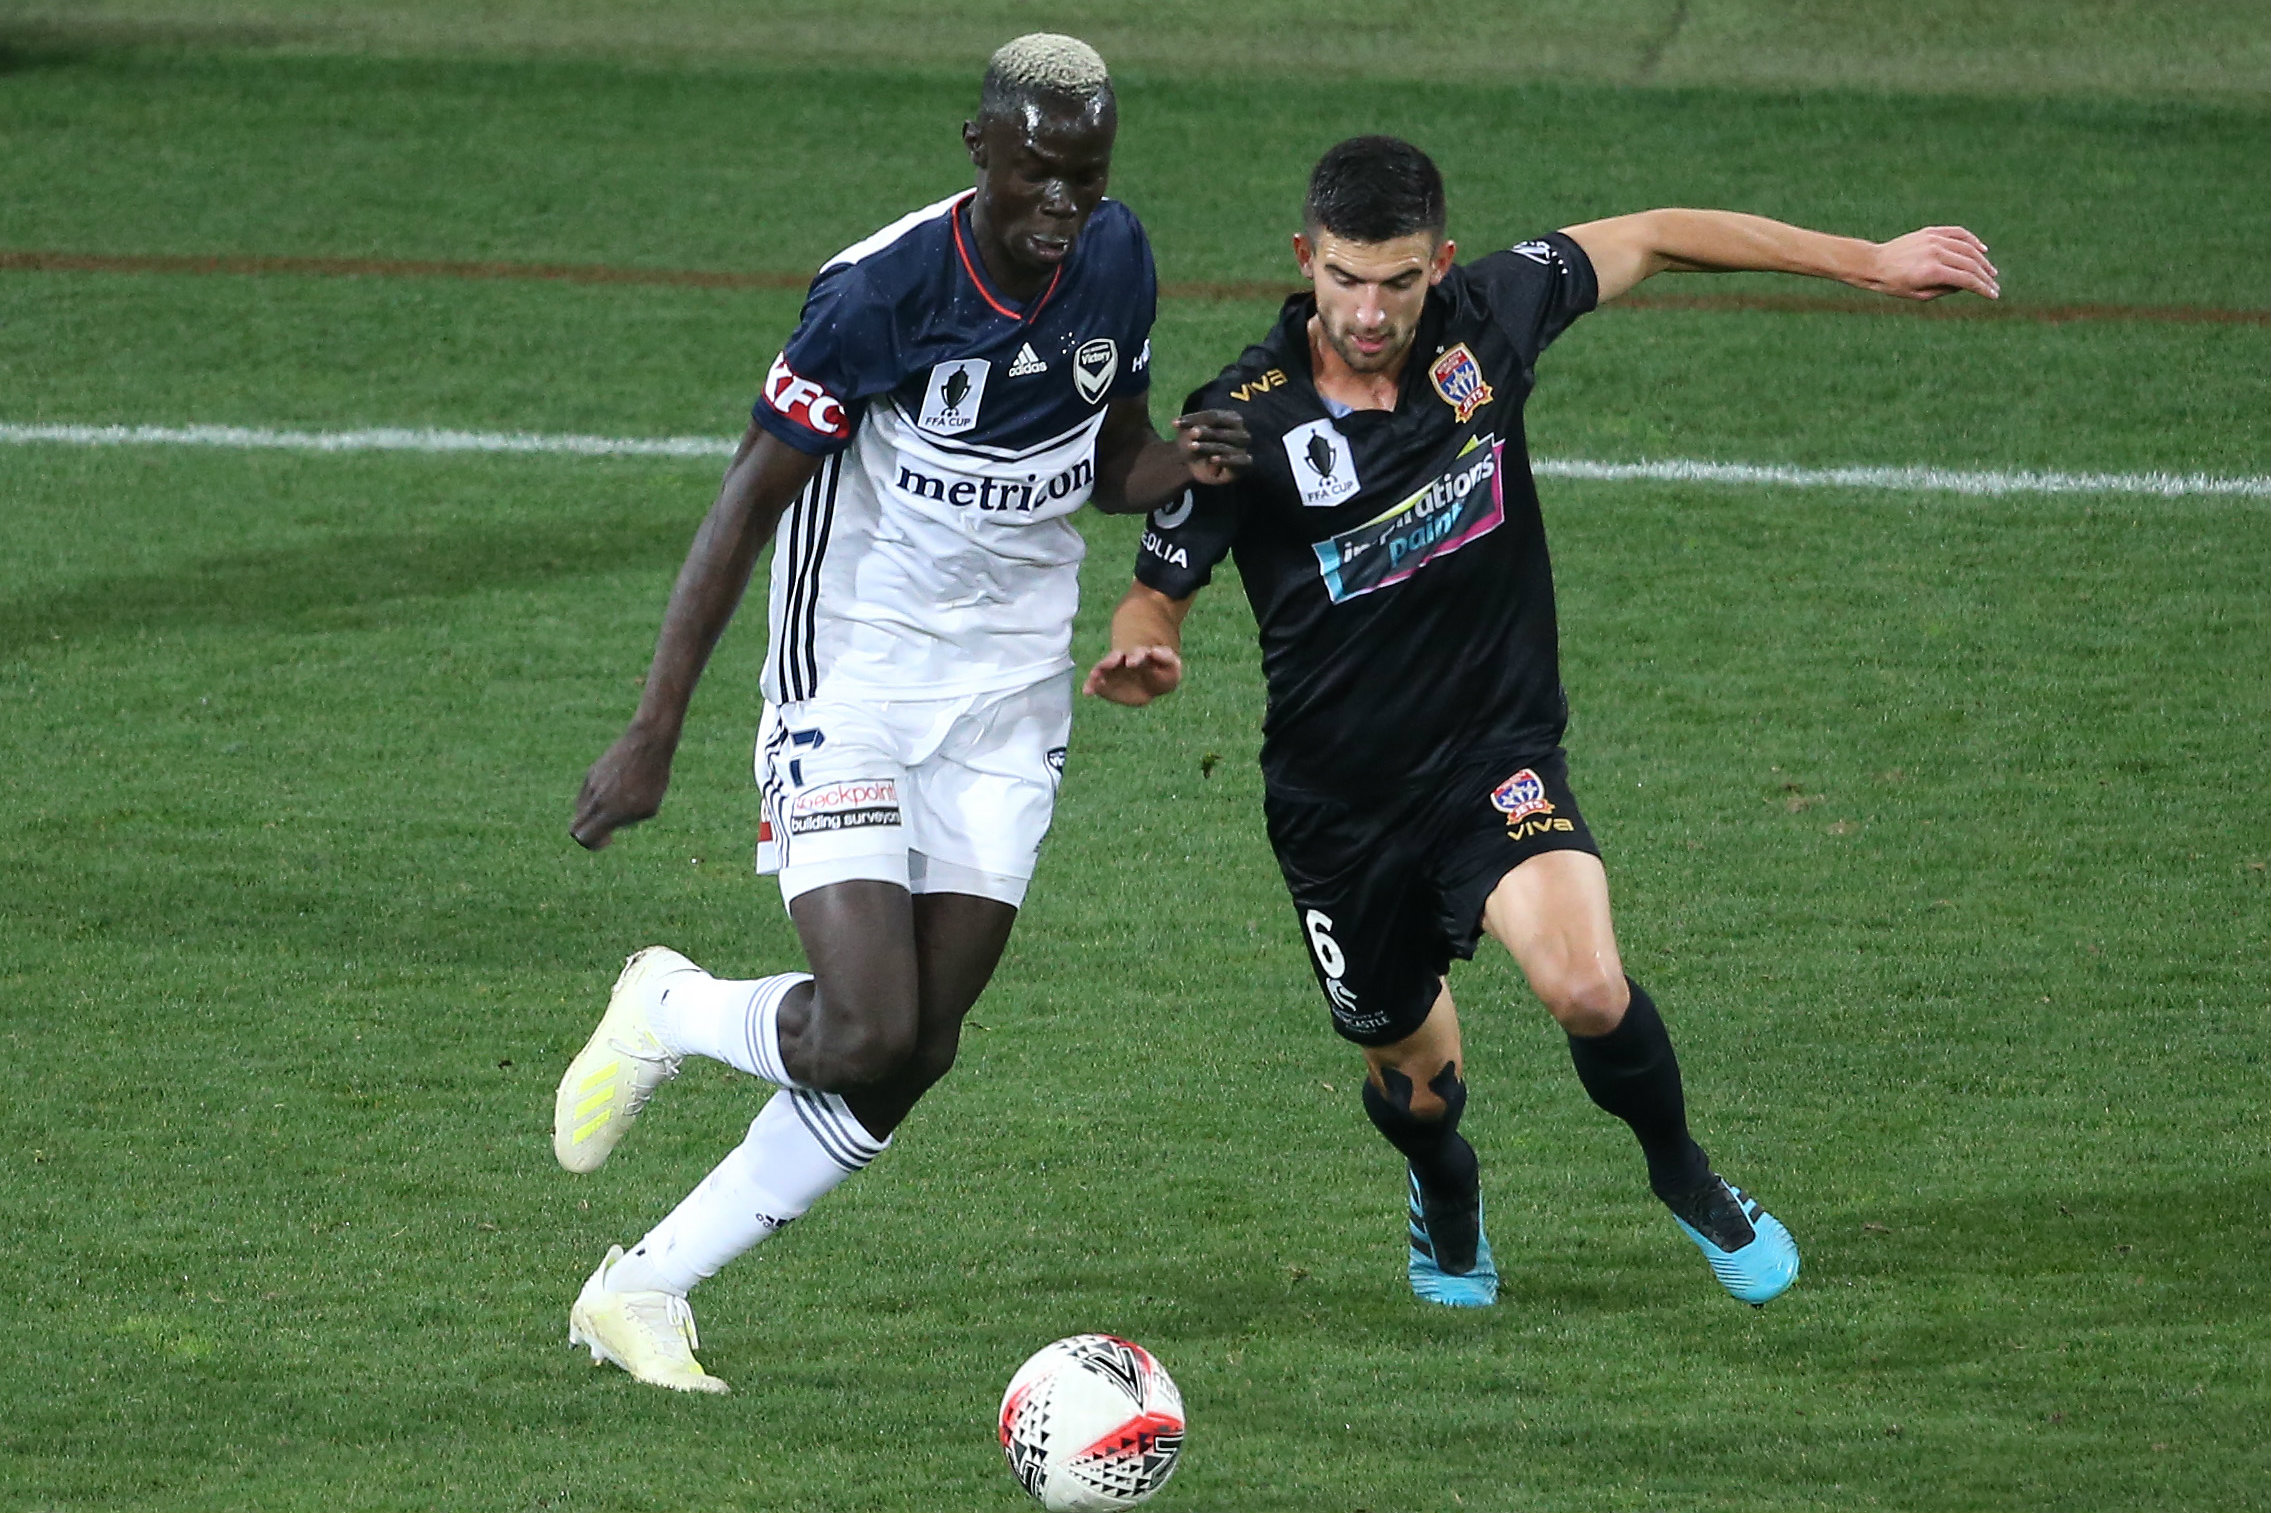 Steven Ugarkovic covered more than 17,000 metres against Melbourne Victory in the FFA Cup 2019 Round of 32